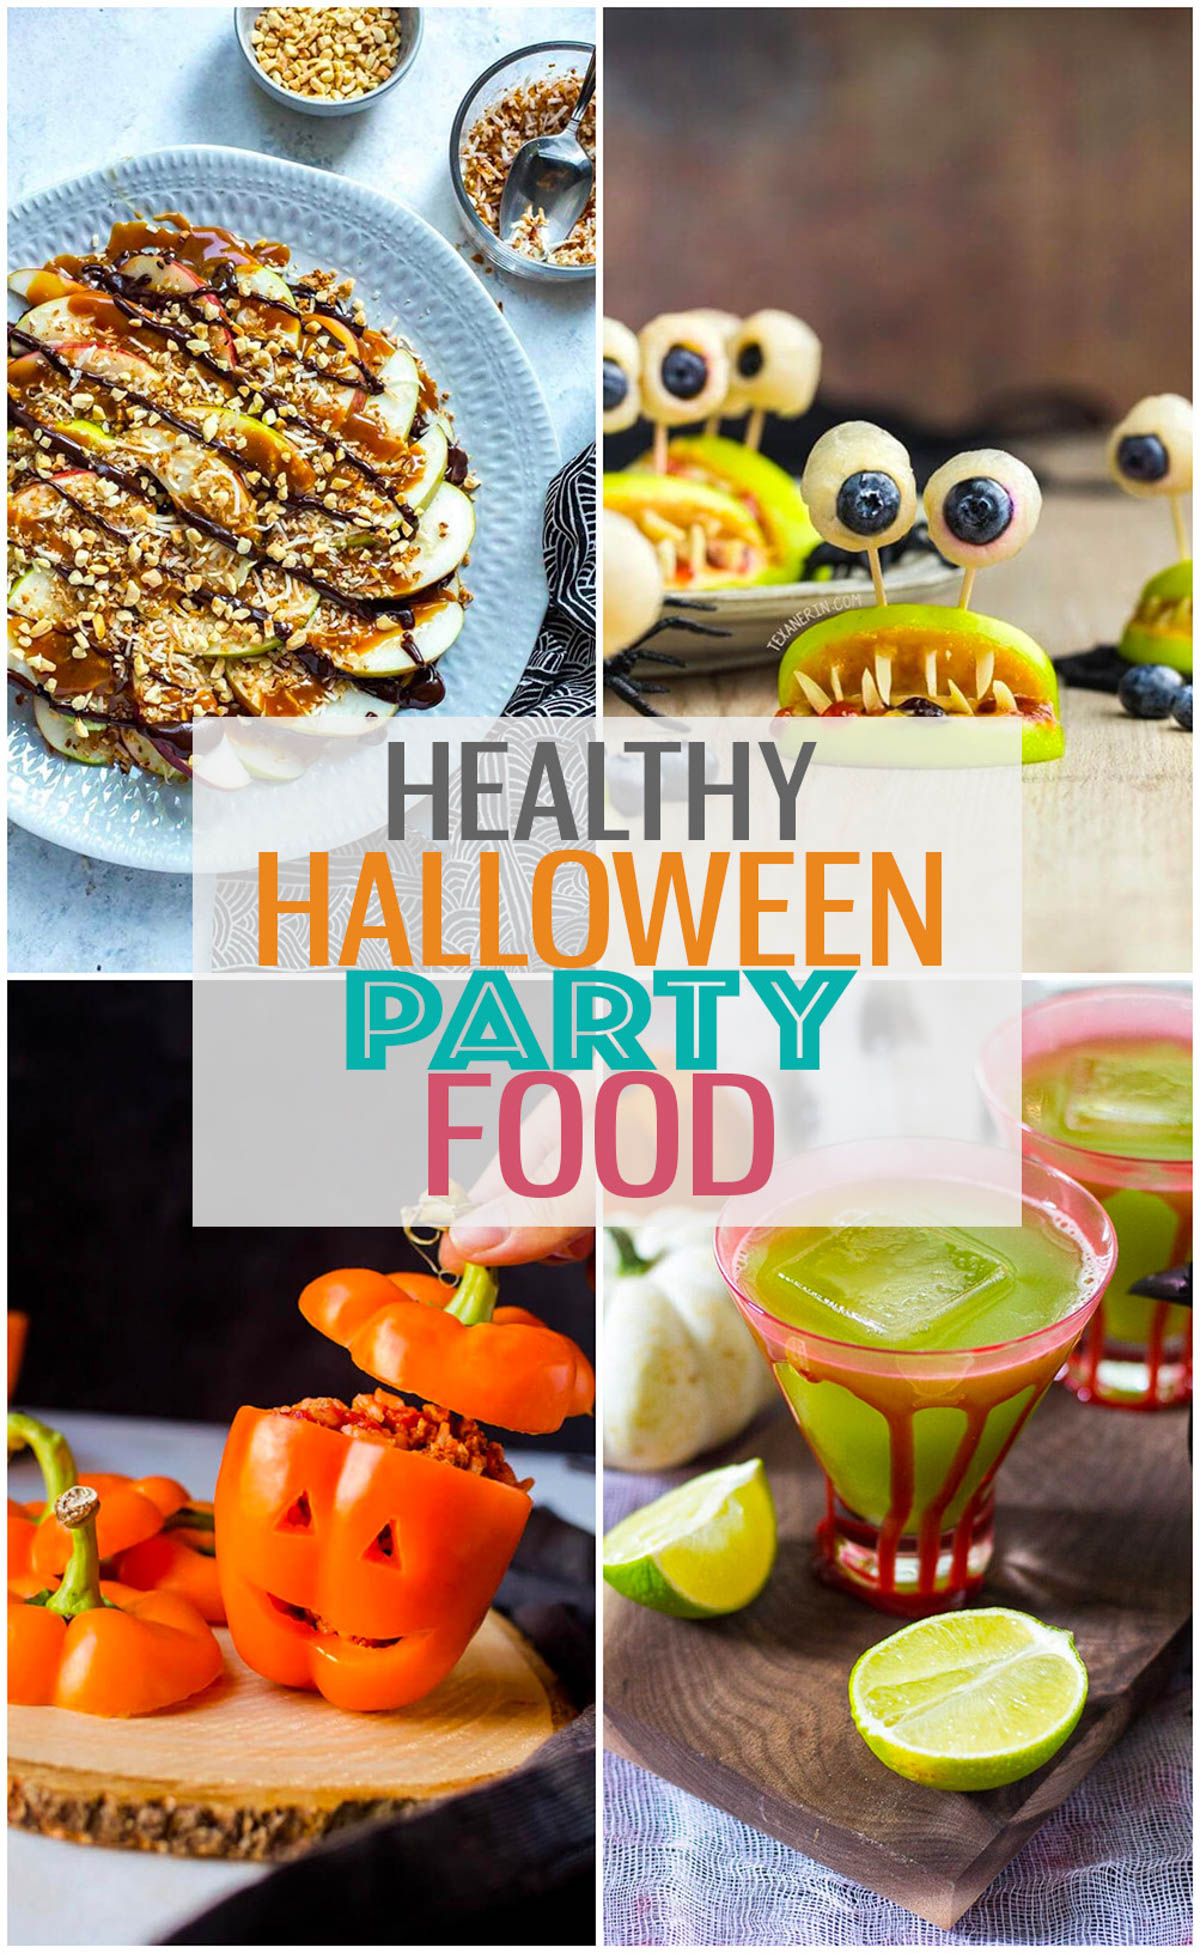 Four different Halloween recipes with the text "Healthy Halloween Party Food" layered over top.